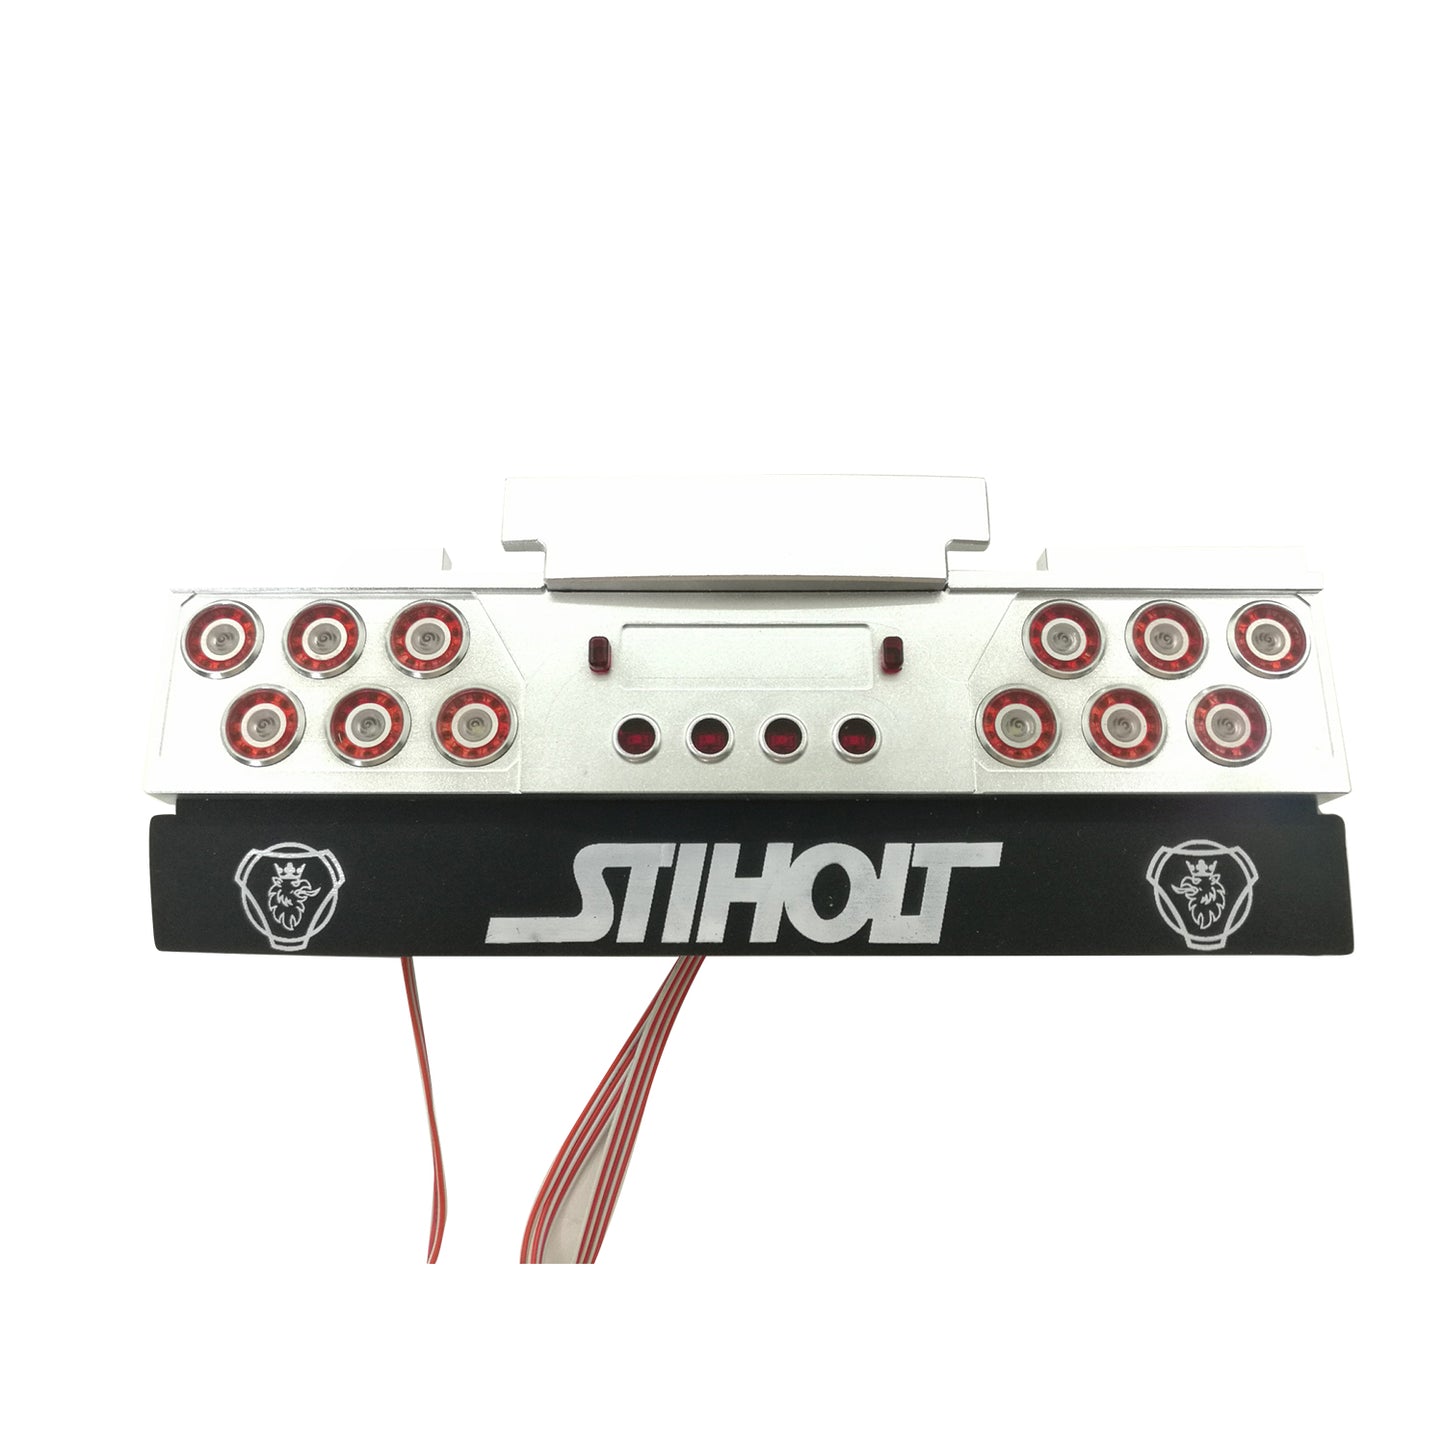 Degree Rear Tail Beam LED Taillight CNC Upgrade Universal Parts For 1/14 TAMILYA Benzs RC Tractor Car DIY Remote Controlled Model